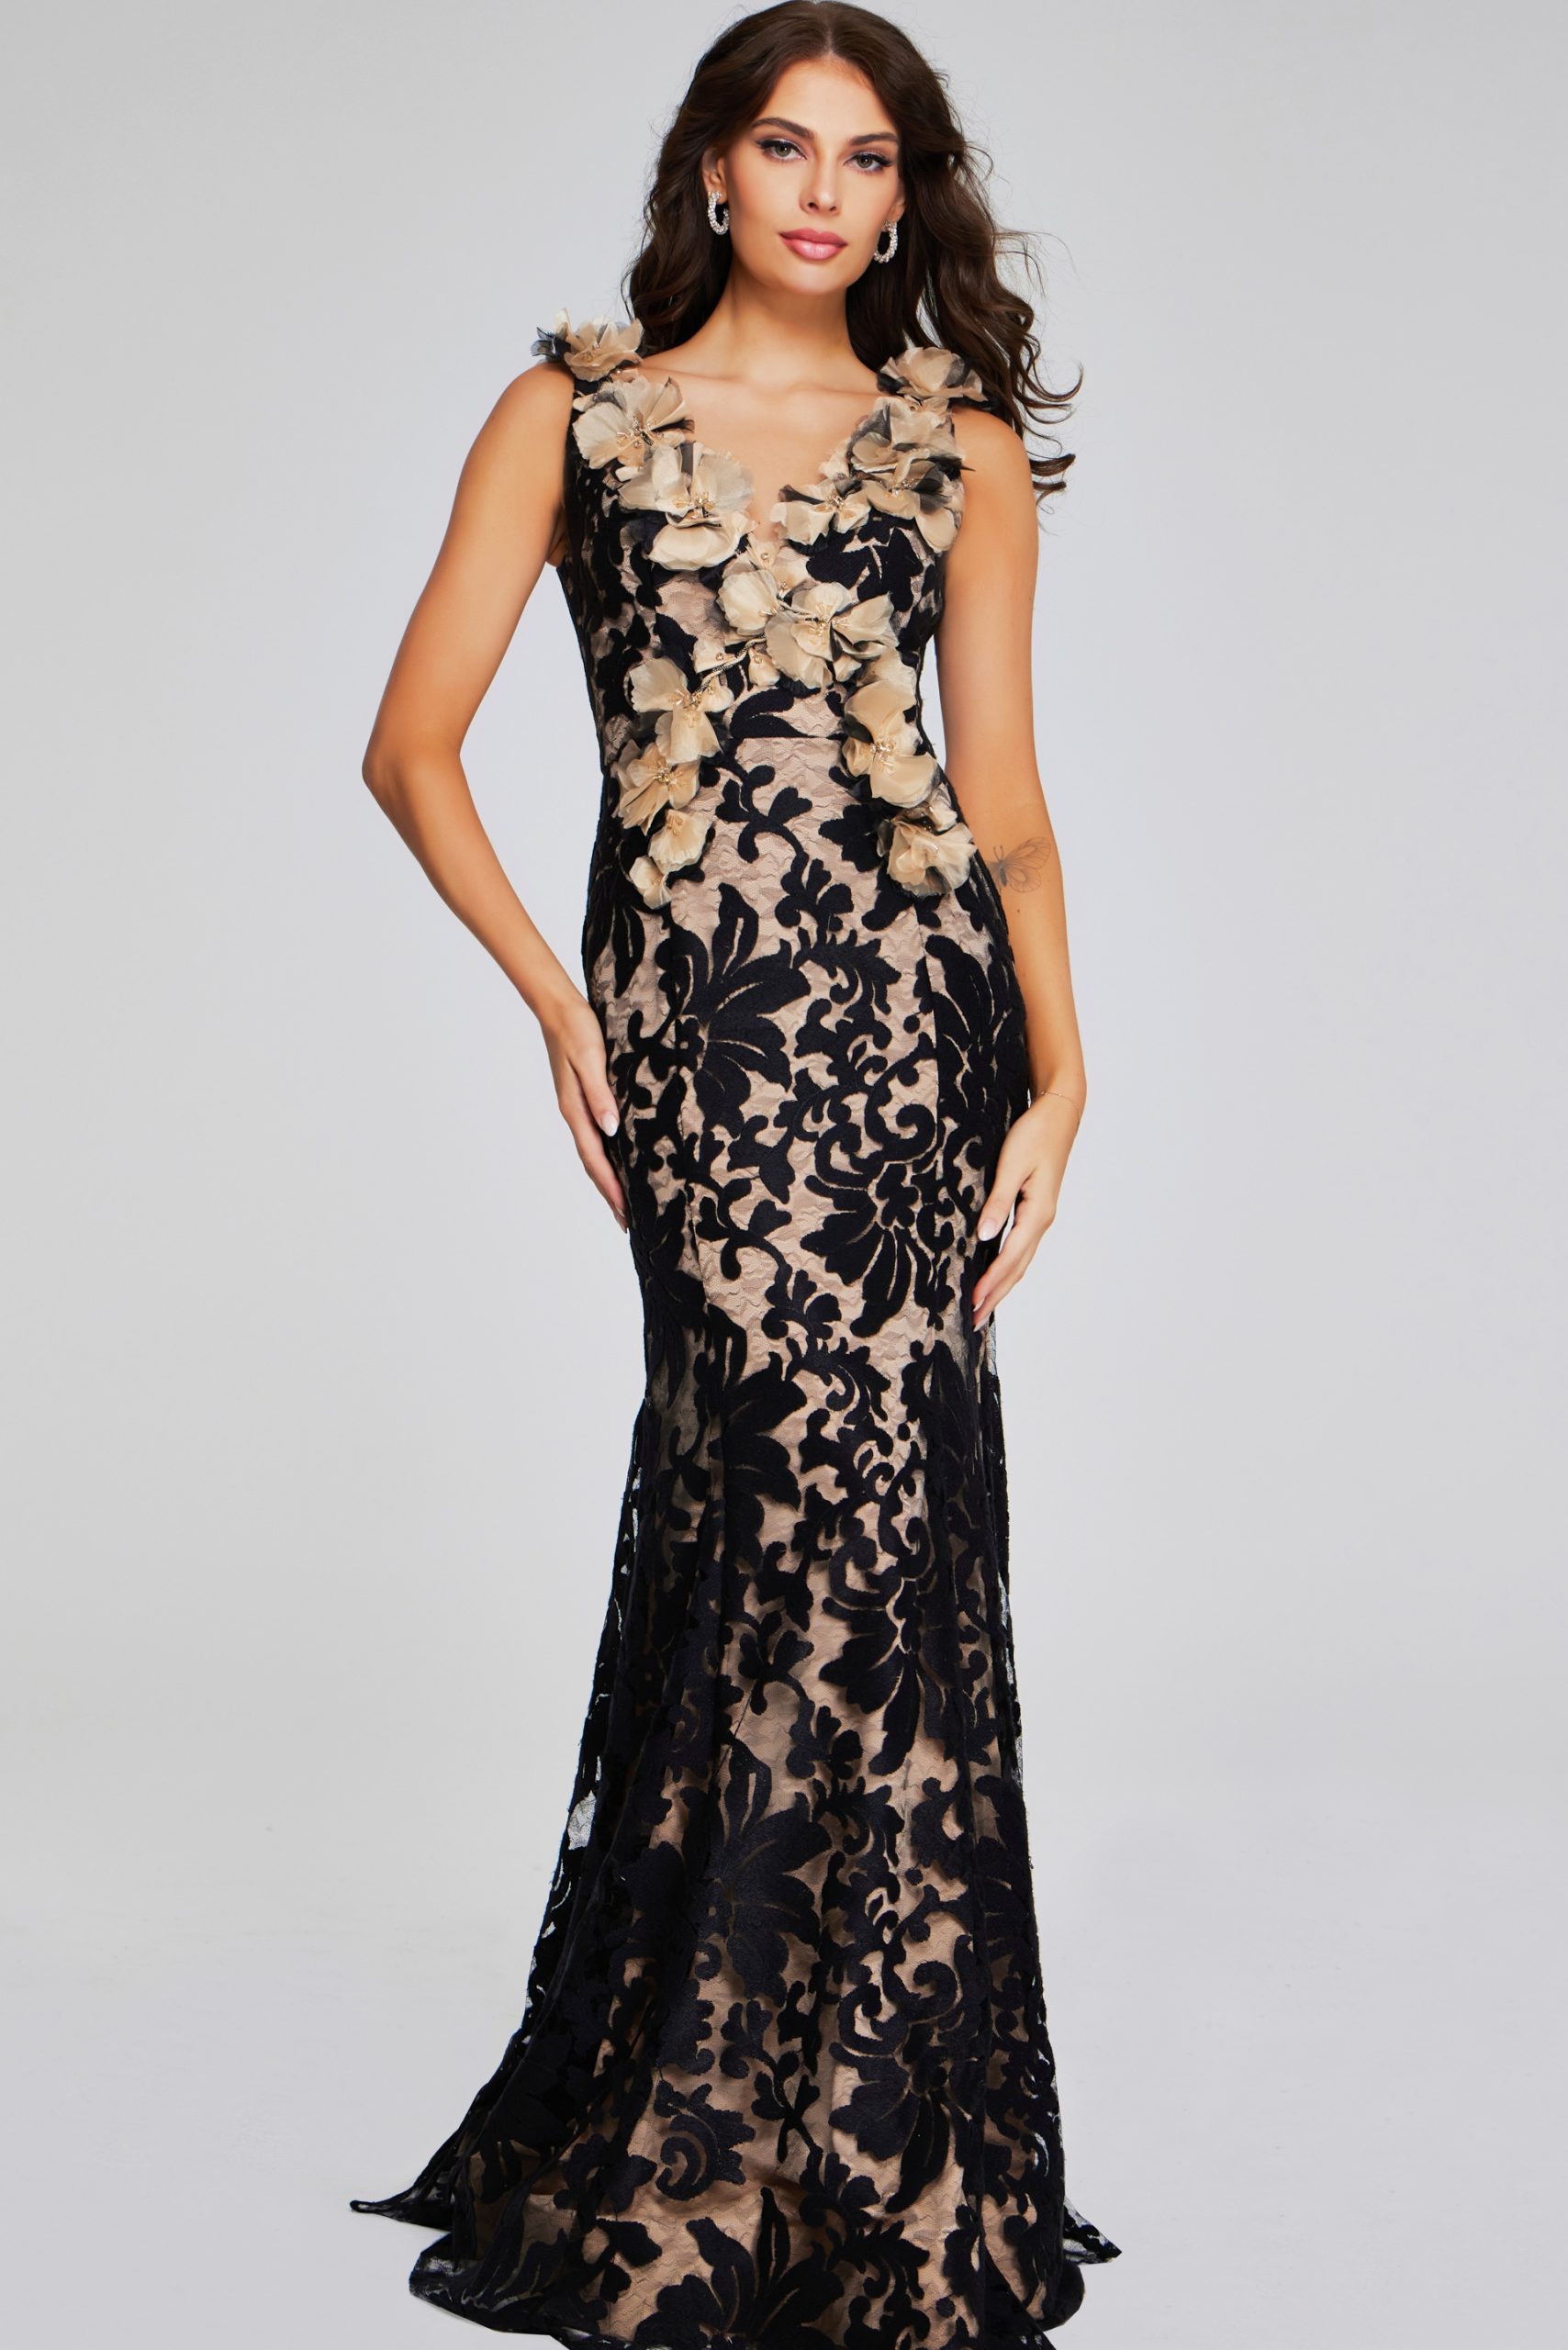 Black and Nude Floral Gown 38497